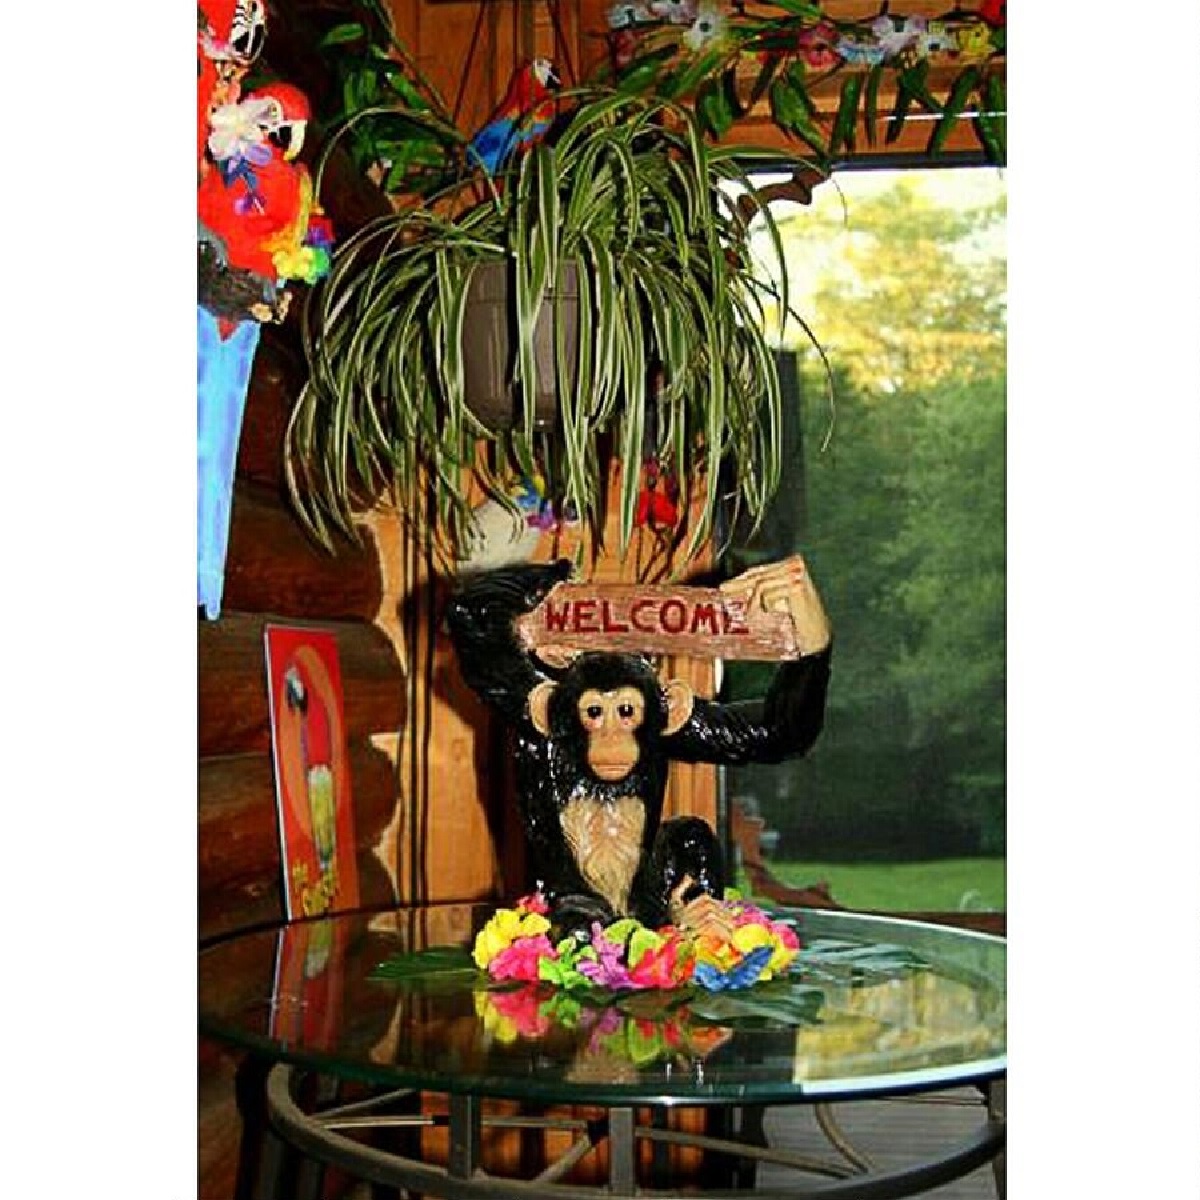 Outdoor Living and Style 12.5" Monkey Holding "Welcome" Sign Jungle Outdoor Garden Statue